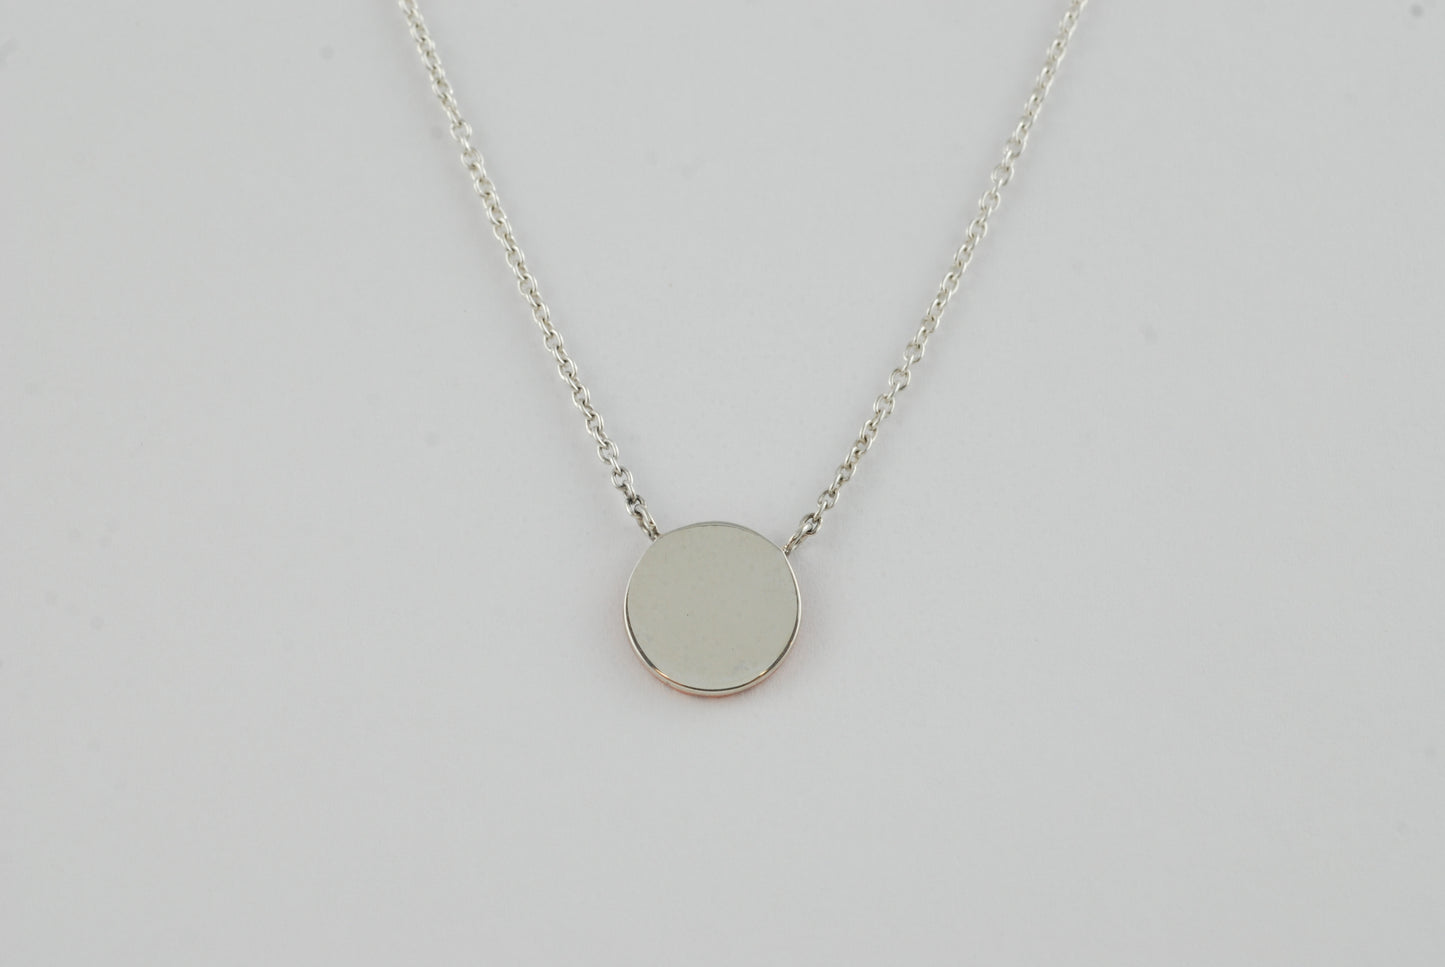 Statement Sterling Silver Necklace with Copper Textured Circle